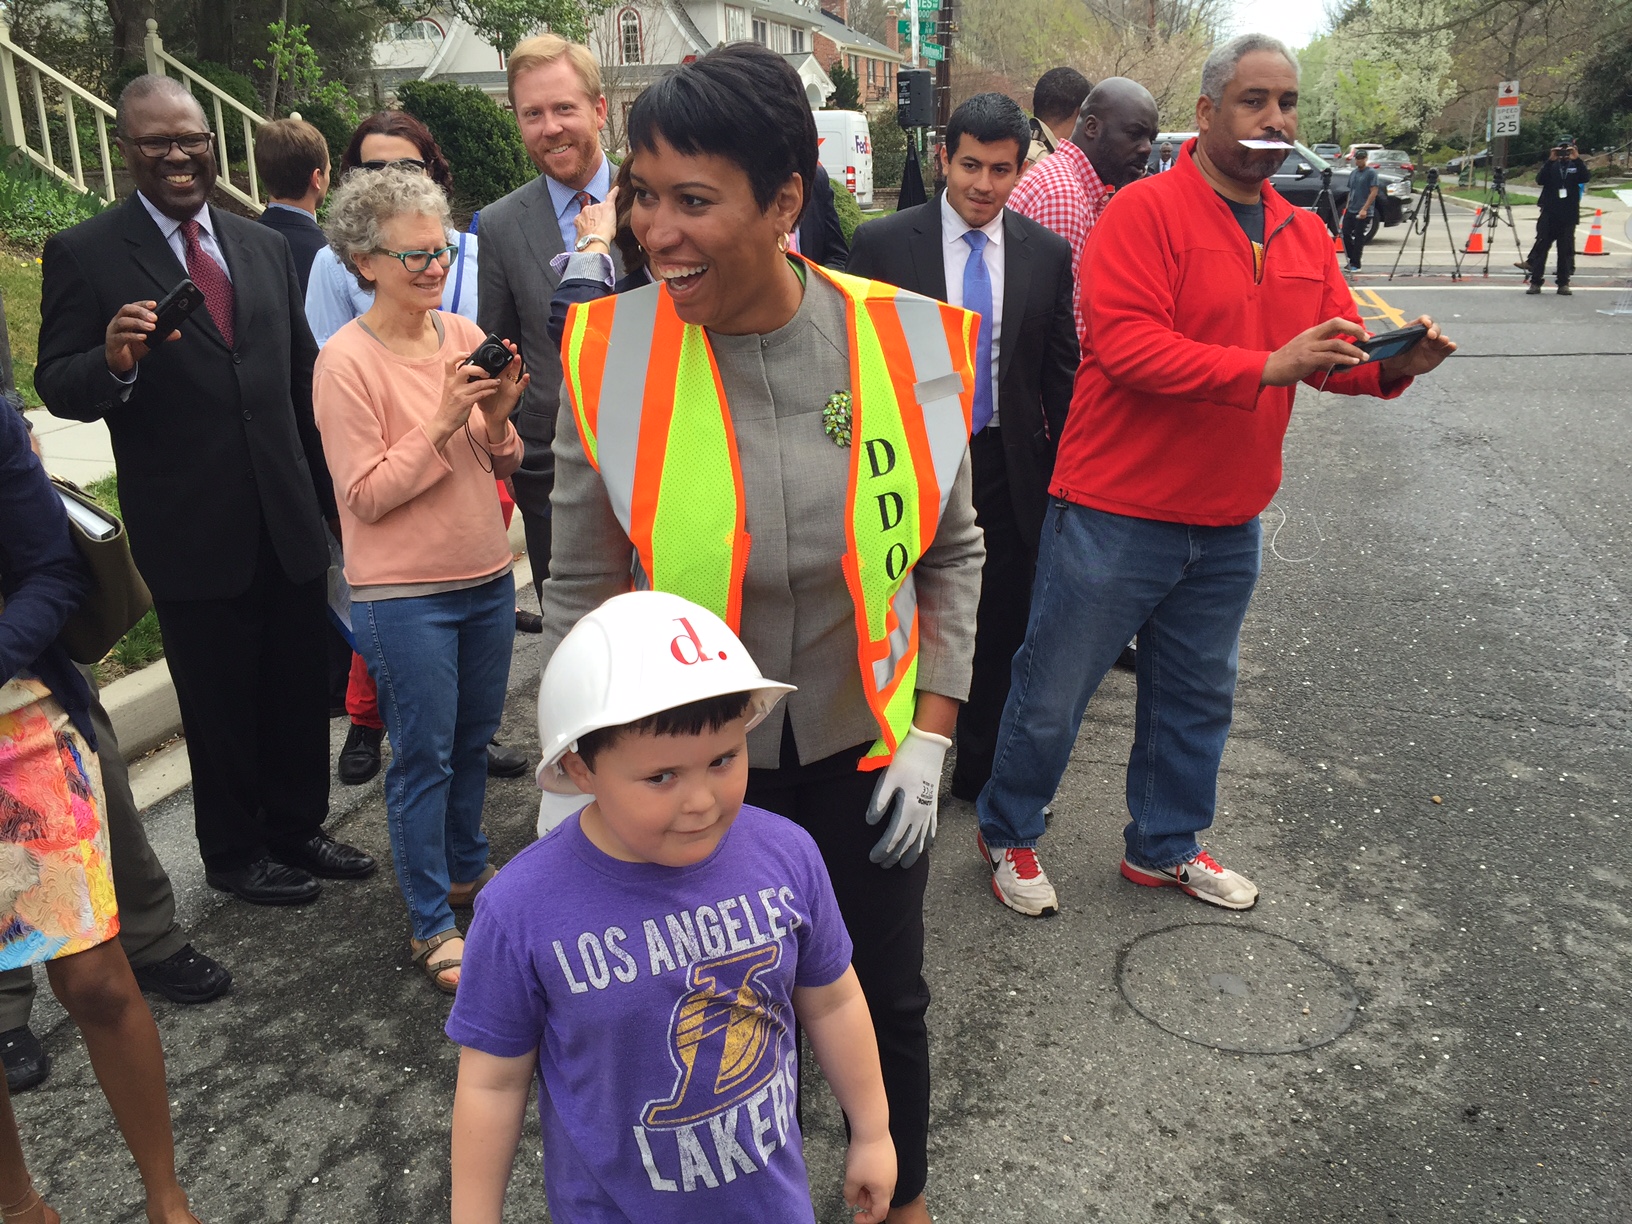 When asked if he wanted to help the mayor fill a pothole, the neighborhood kid told her he didn't know how. (WTOP/Megan Cloherty)